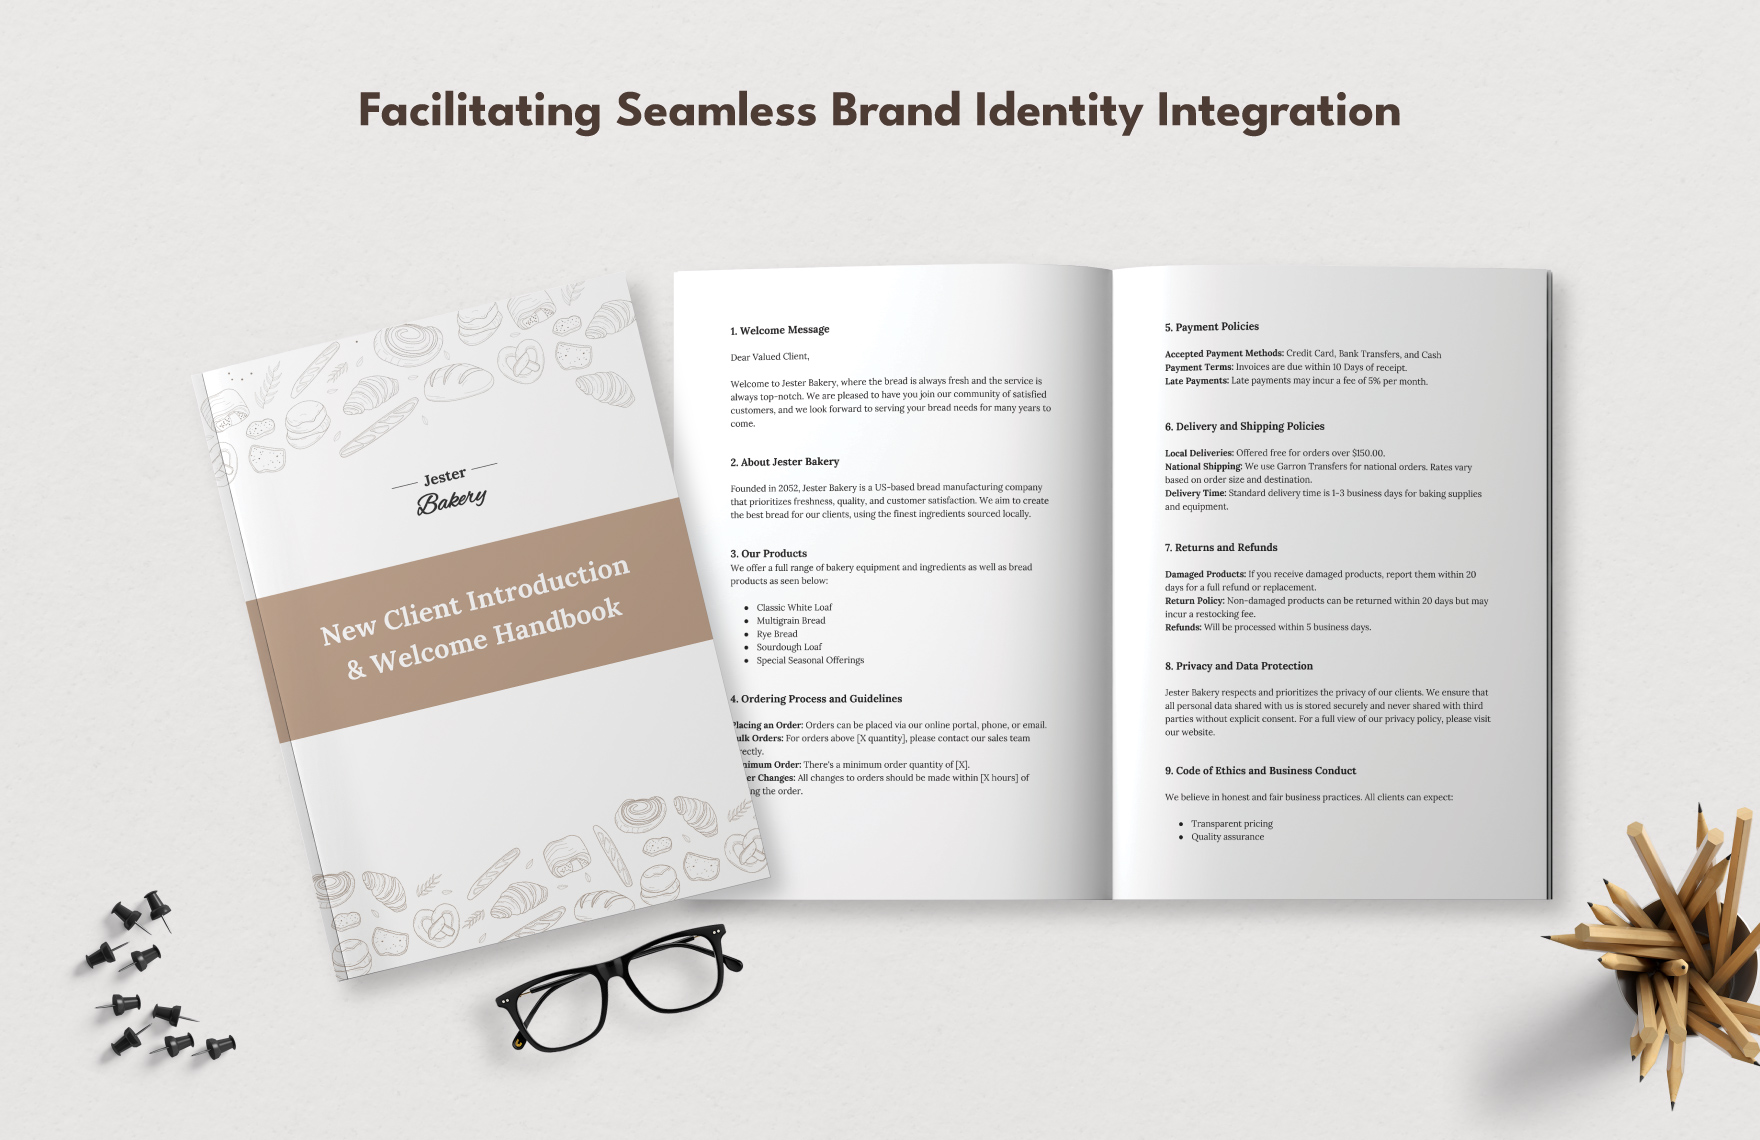 New Client Introduction & Welcome Handbook Template